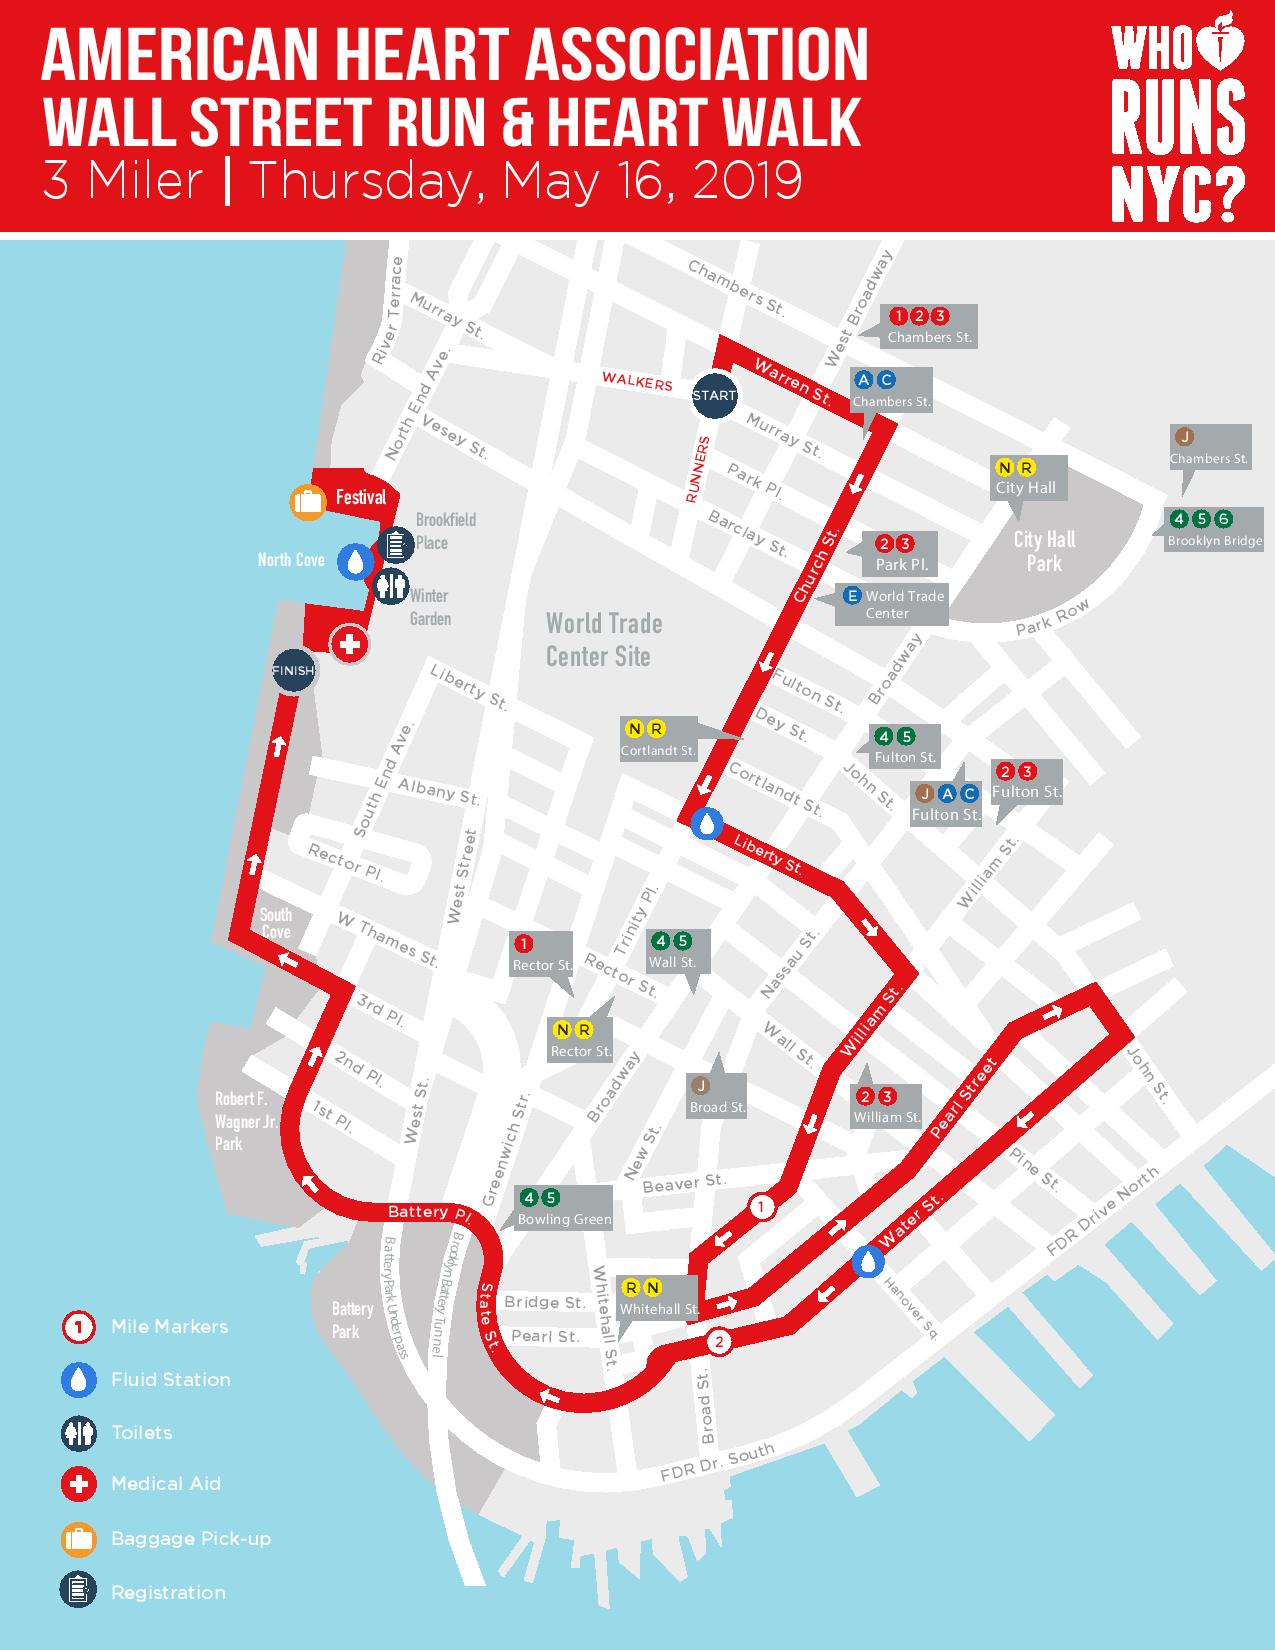 2020 VIRTUAL Wall Street Run & Heart Walk (Downtown Event Being Transitioned) Course Map